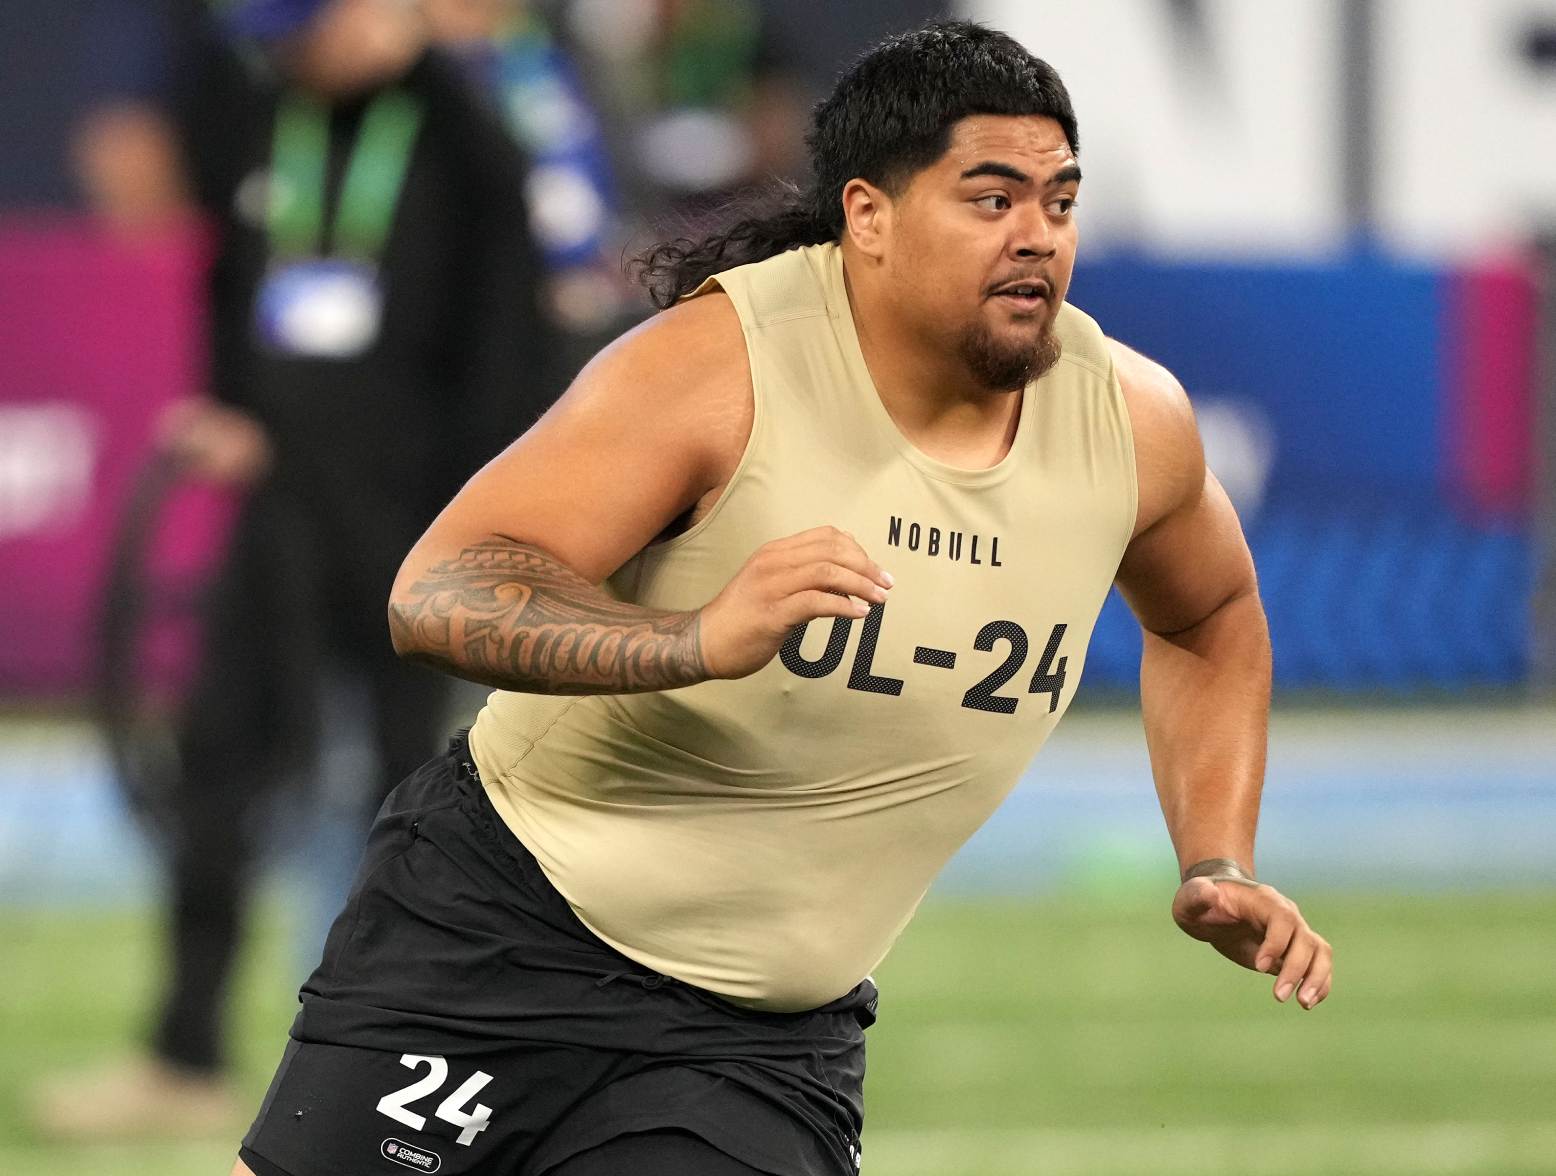 Mar 3, 2024; Indianapolis, IN, USA; Oregon State offensive lineman Taliese Fuaga (OL24) during the 2024 NFL Combine at Lucas Oil Stadium. Credit: Kirby Lee-USA TODAY Sports